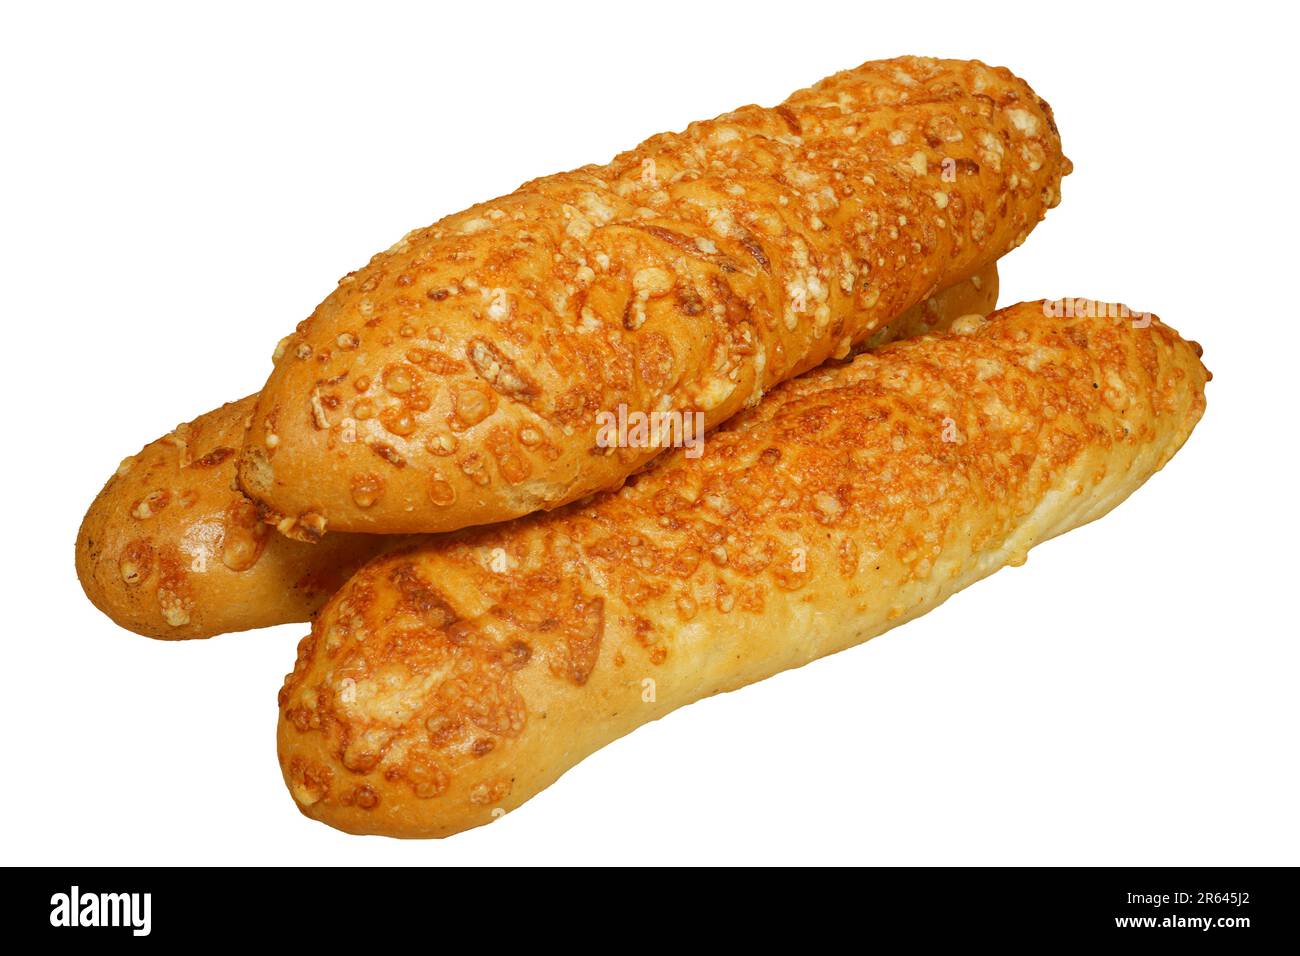 Cheese bread without background. Cheese rolls. Stock Photo